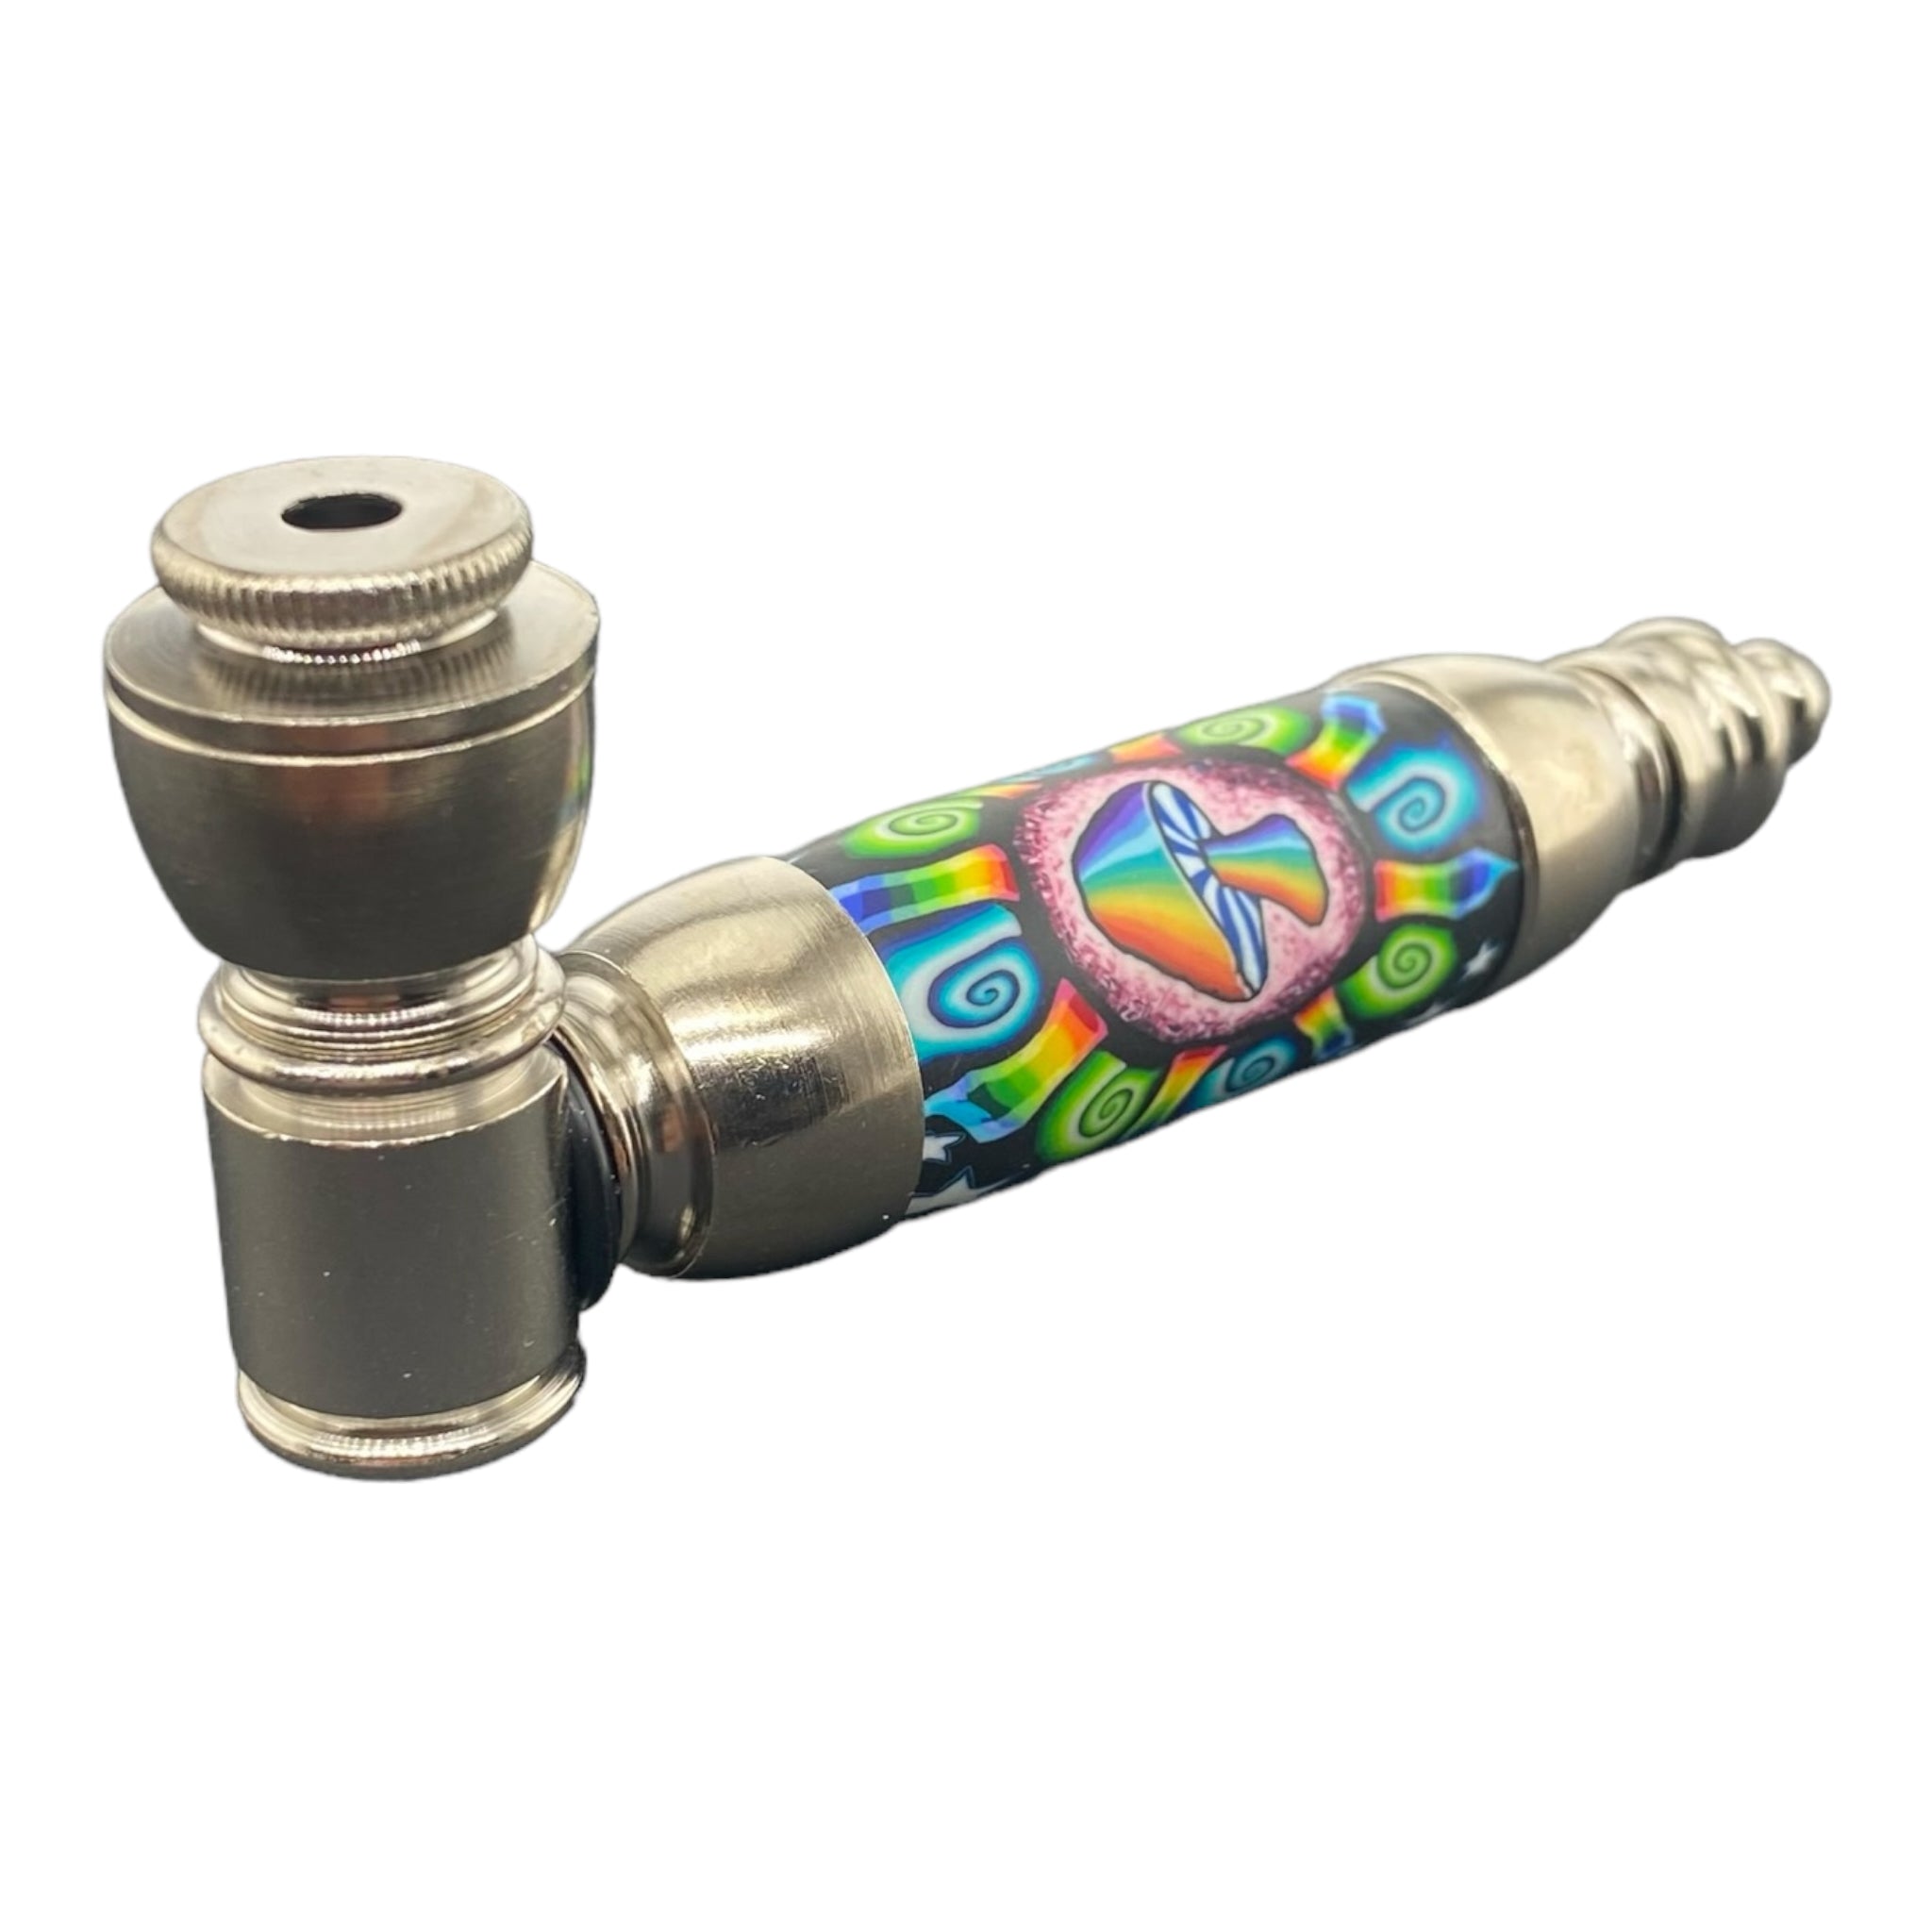 Metal Hand Pipes - Large Chamber Silver Chrome Hand Pipe With Rainbow Blast Mushroom